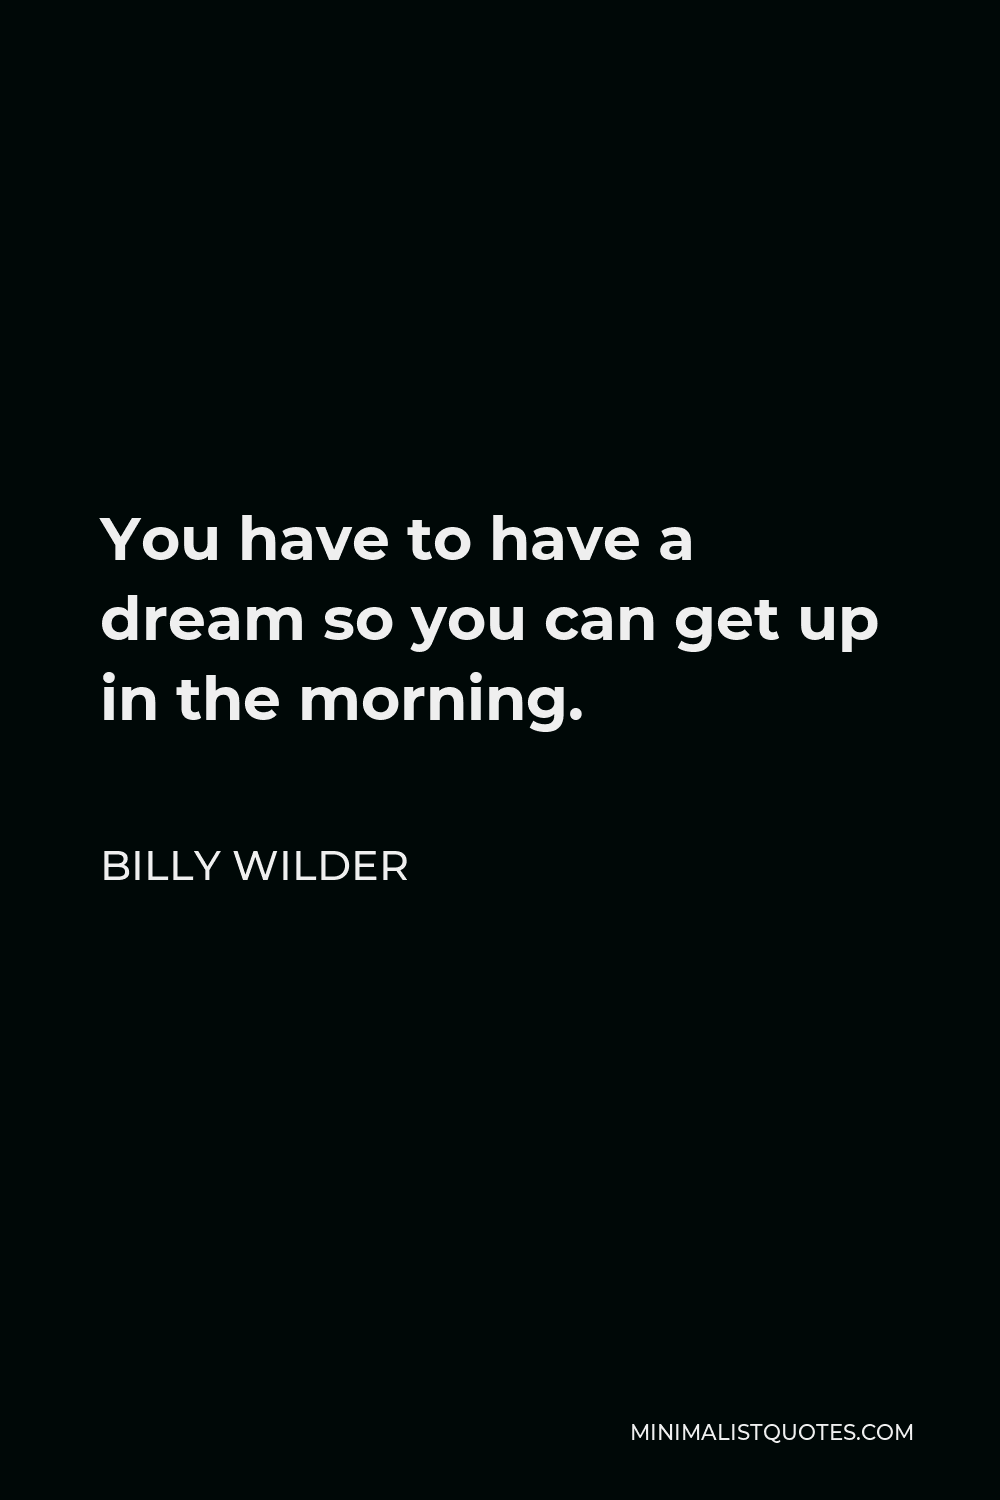 Billy Wilder Quote - You have to have a dream so you can get up in the morning.